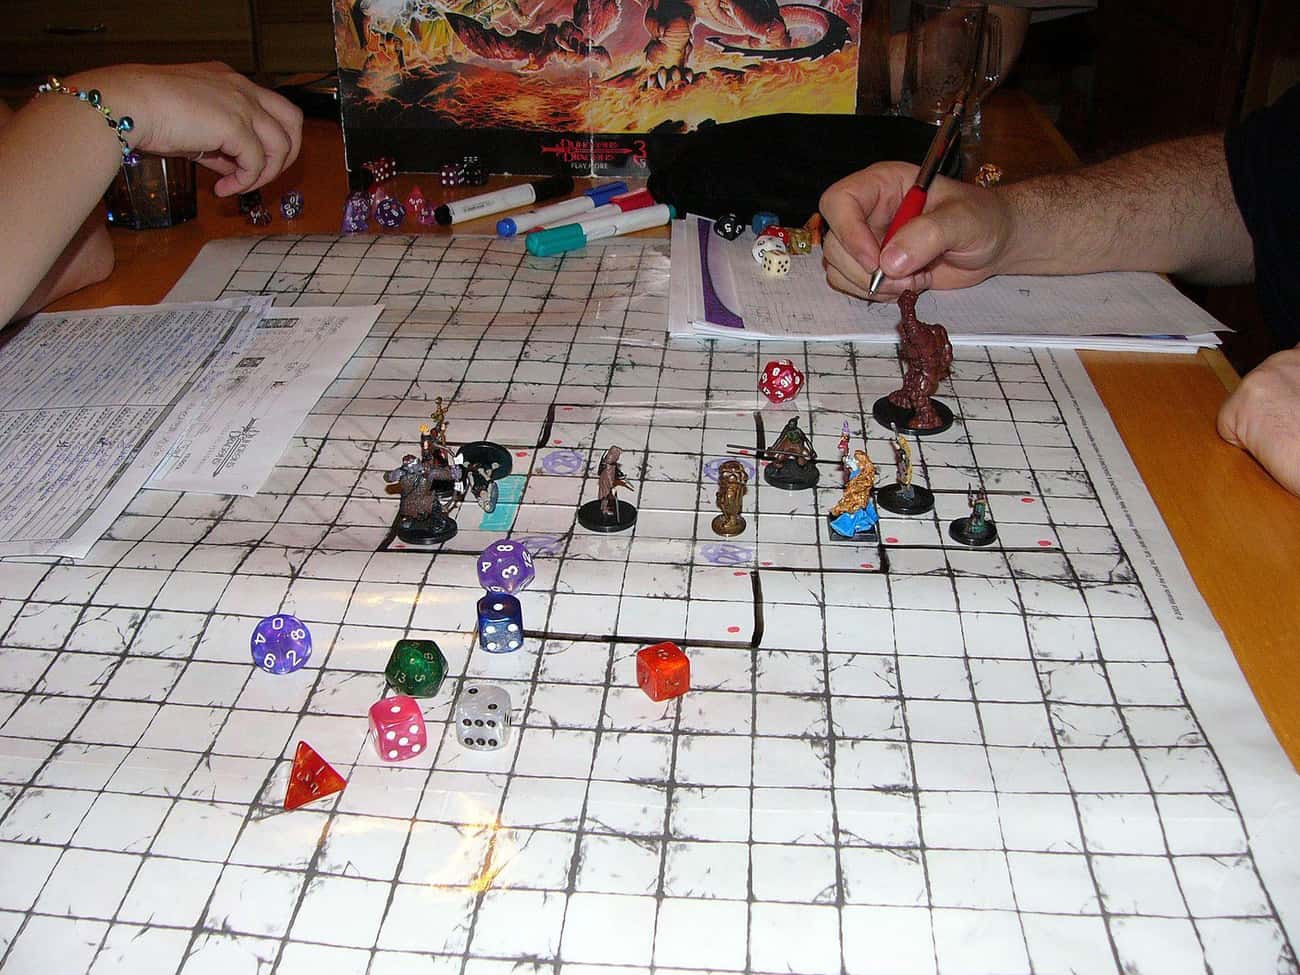 1979: Dungeons & Dragons Sparks Panic Following The 'Steam Tunnel' Incident 
